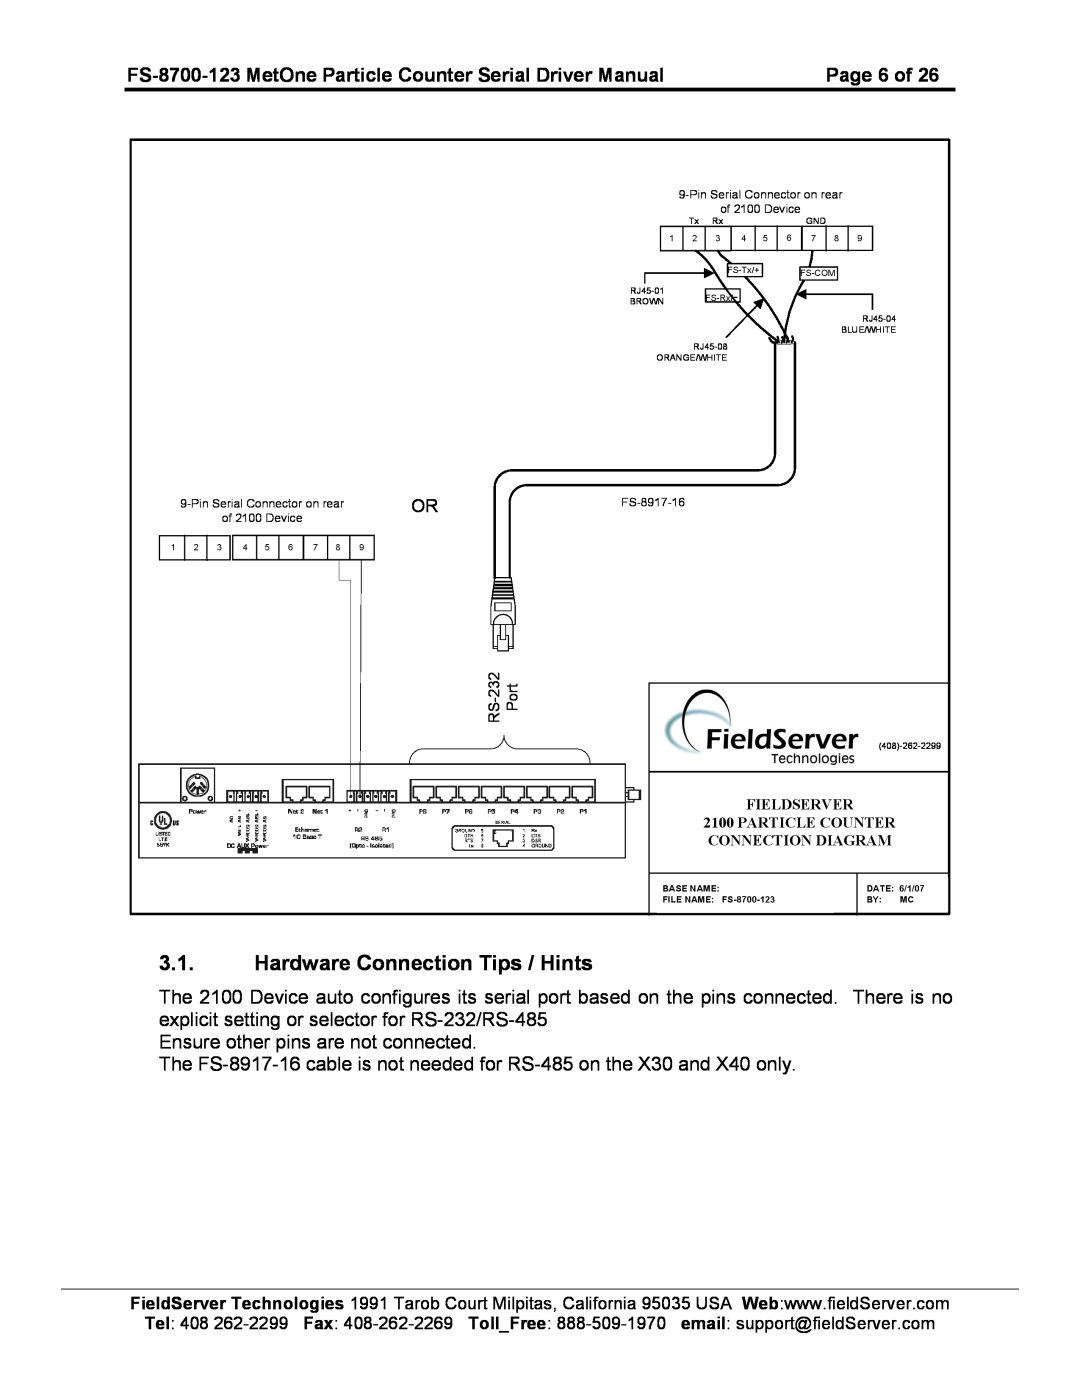 FieldServer FS-8700-123 instruction manual Hardware Connection Tips / Hints 